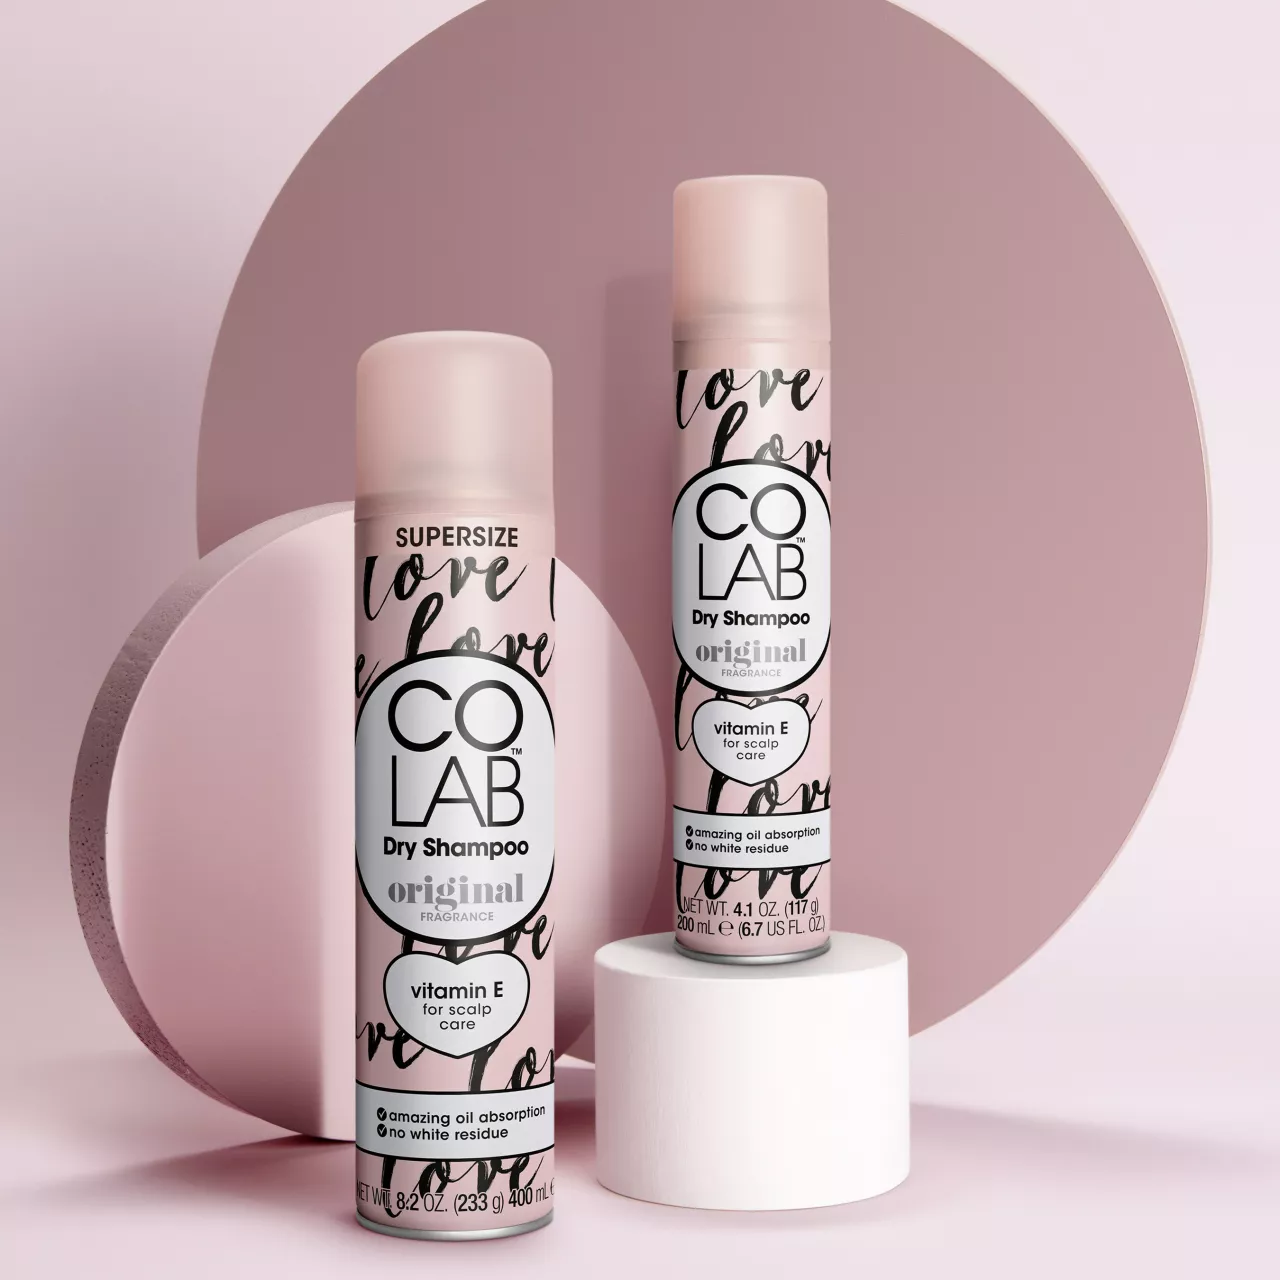 COLAB, TikTok's favorite dry shampoo brand, is launching their biggest EVER social media campaign, celebrating that incredible boost of con